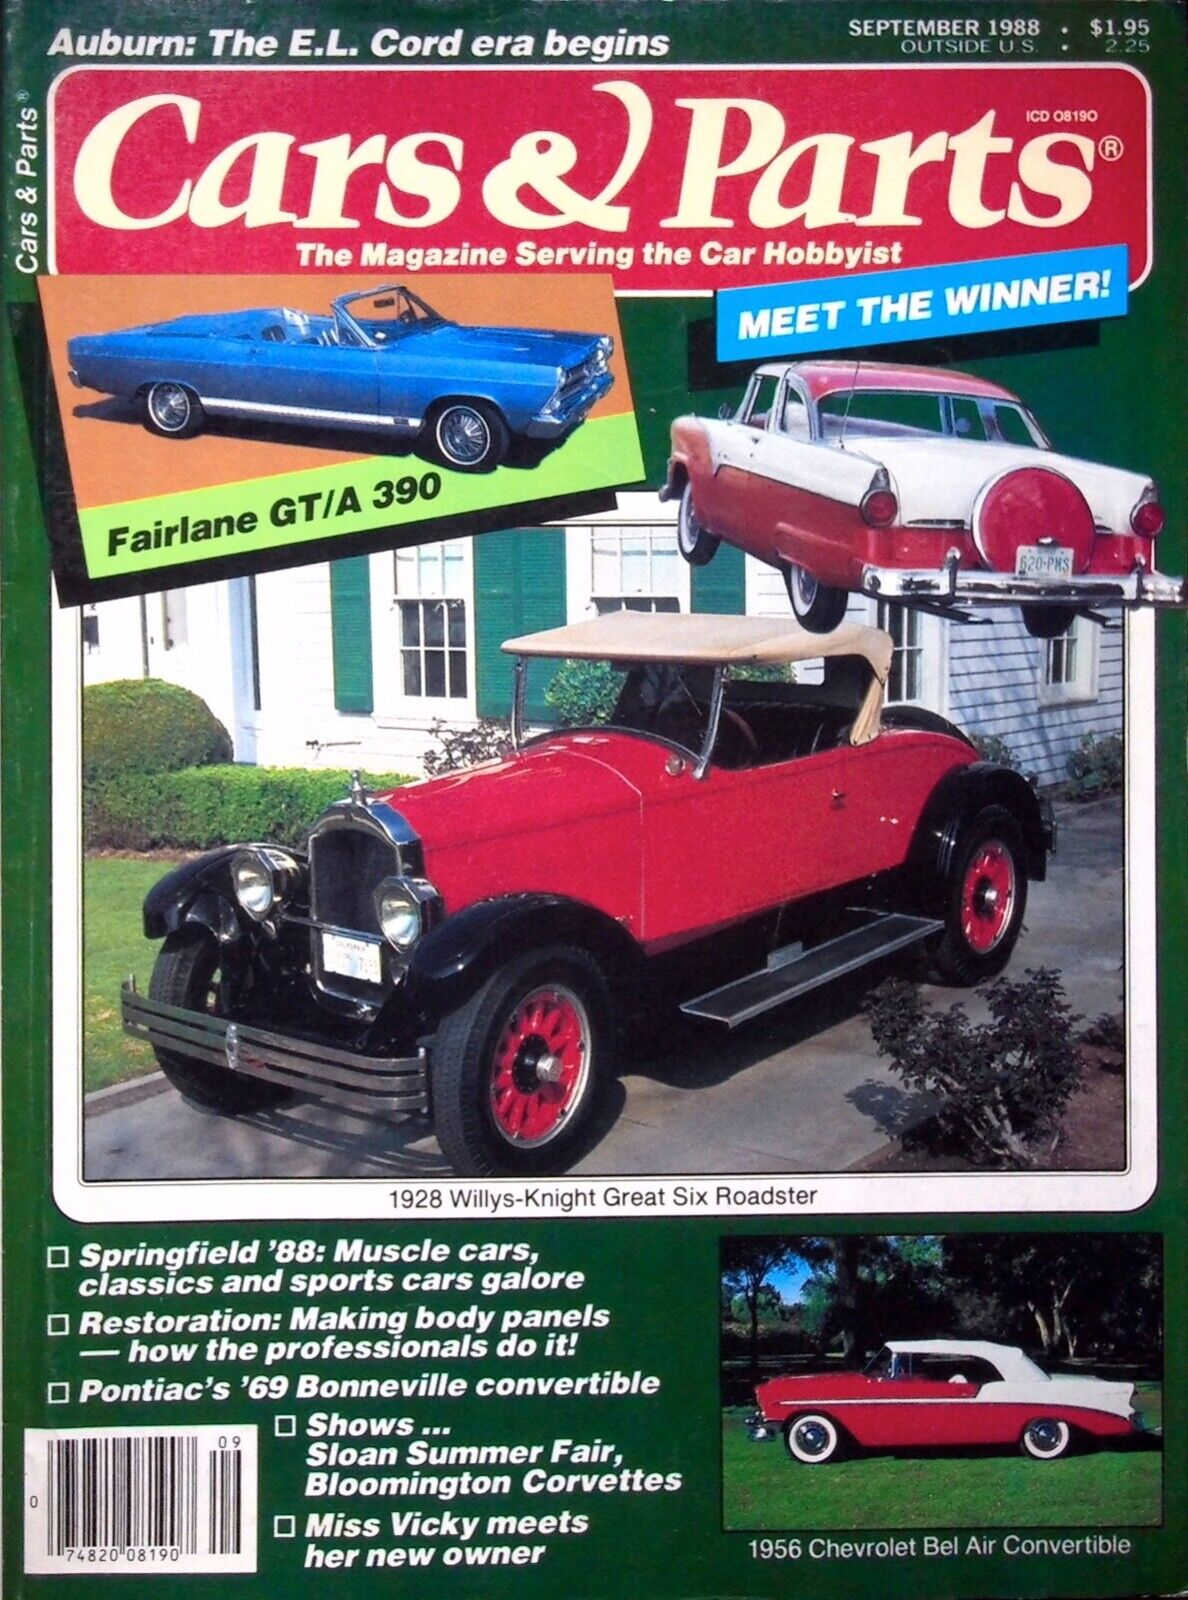 1928 WILLYS-KNIGHT GREAT SIX ROADSTER - CARS & PARTS MAGAZINE, SEPTEMBER 1988